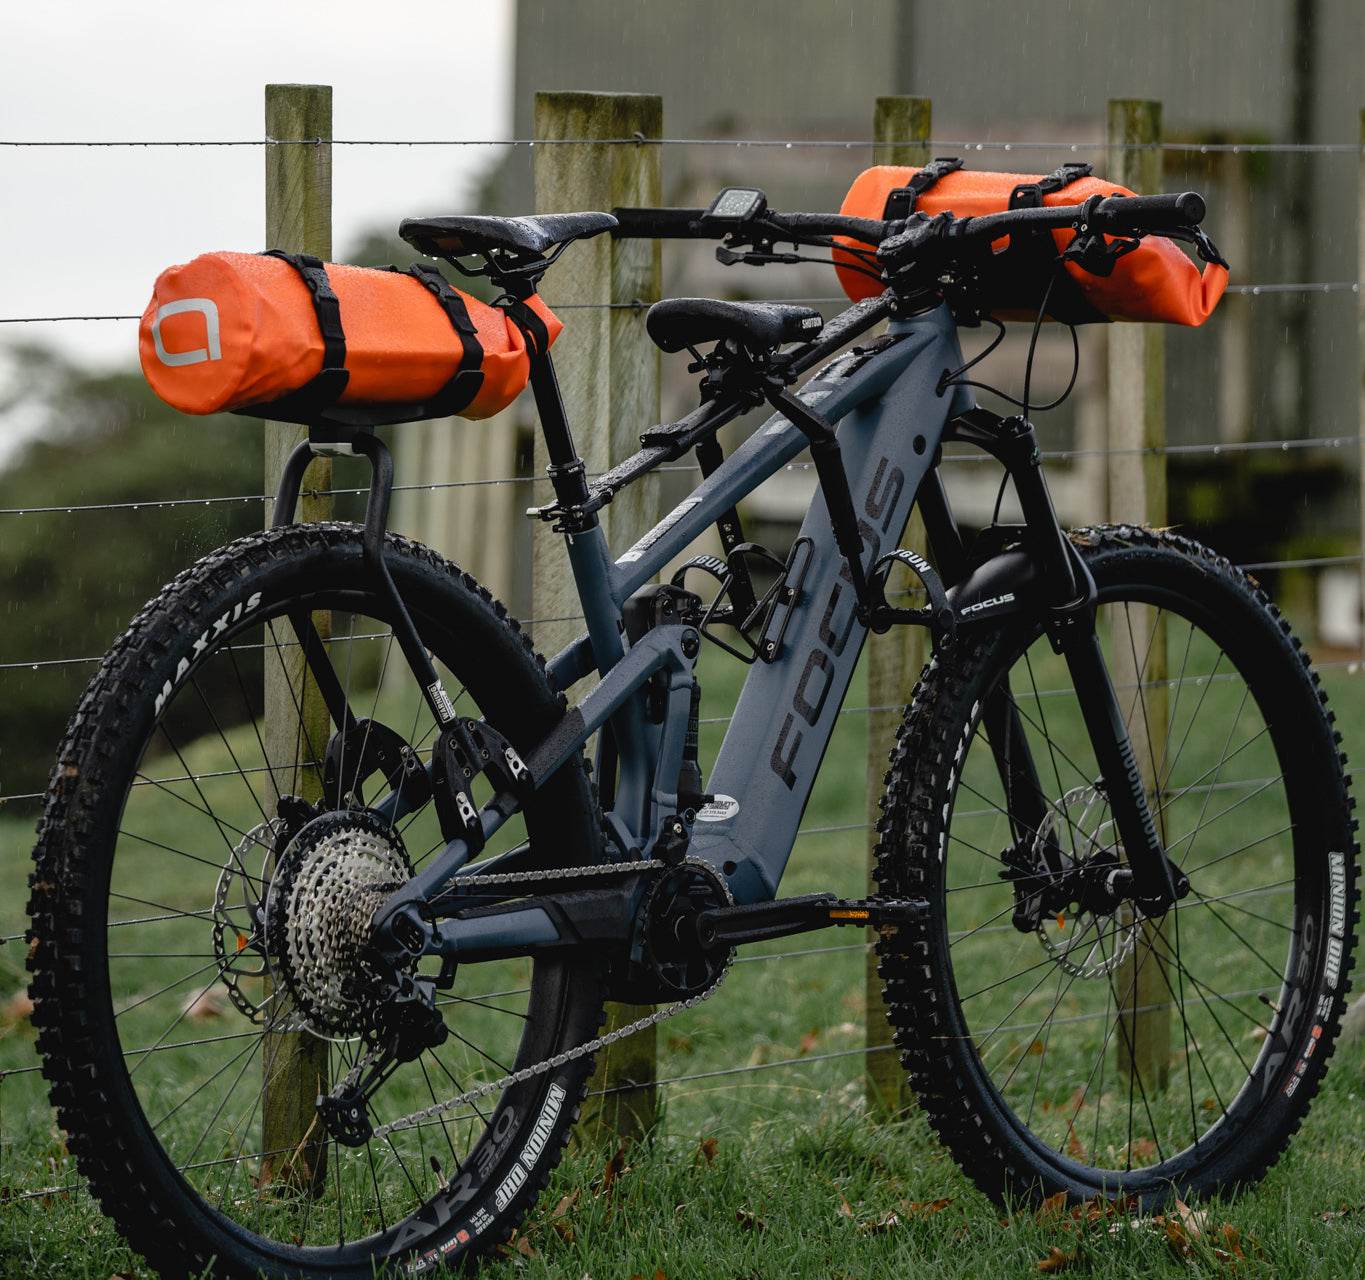 BIKEPACKING OVERNIGHT....OR DAY TRIP WITH YOUNG KIDS?